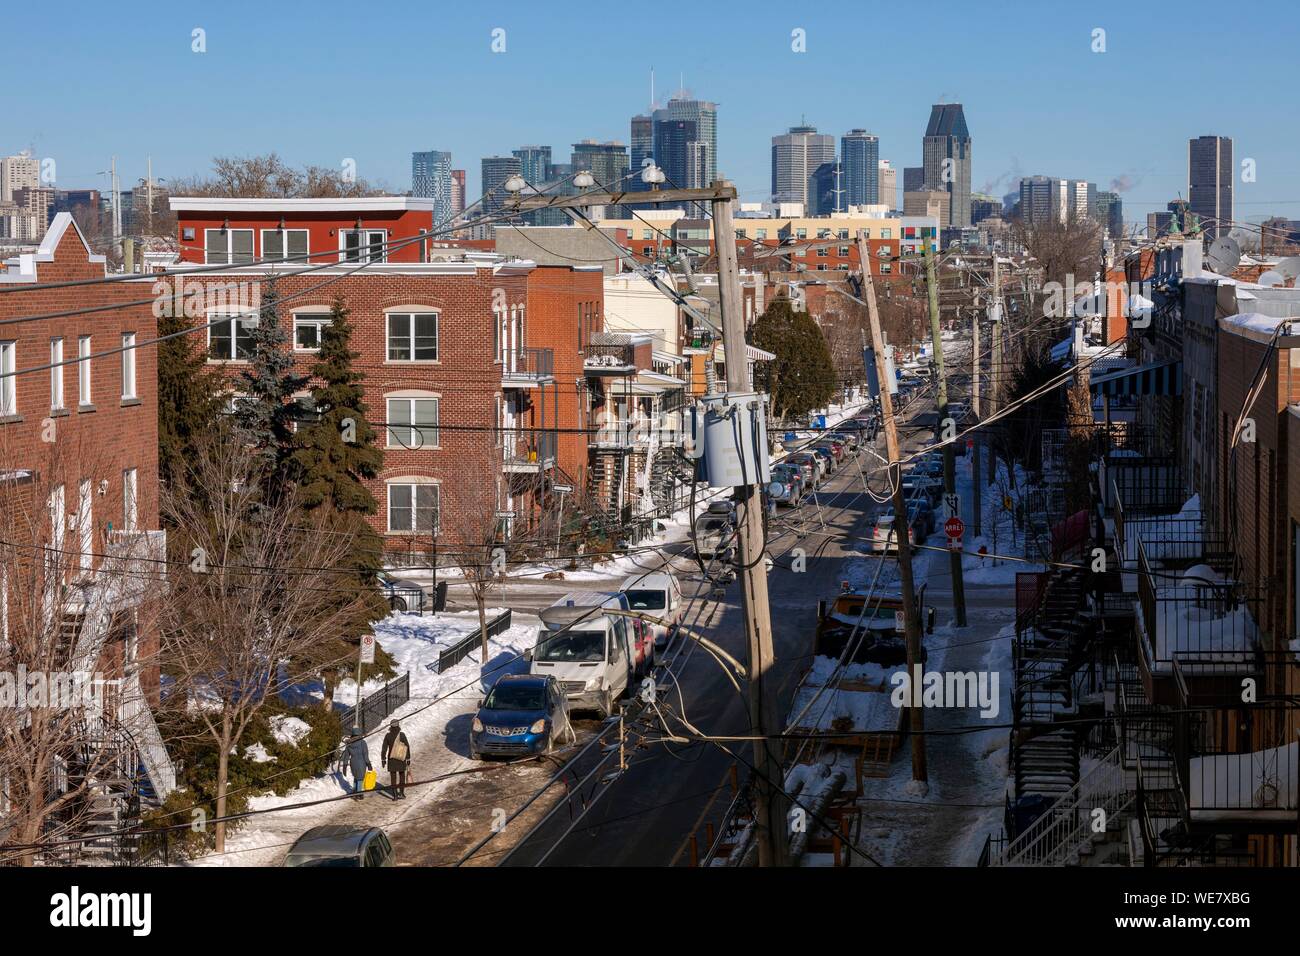 Canada, Province of Quebec, Montreal, Verdun Borough one of the West Montreal neighborhoods, general view, with the Montreal skyscrapers in the background Stock Photo